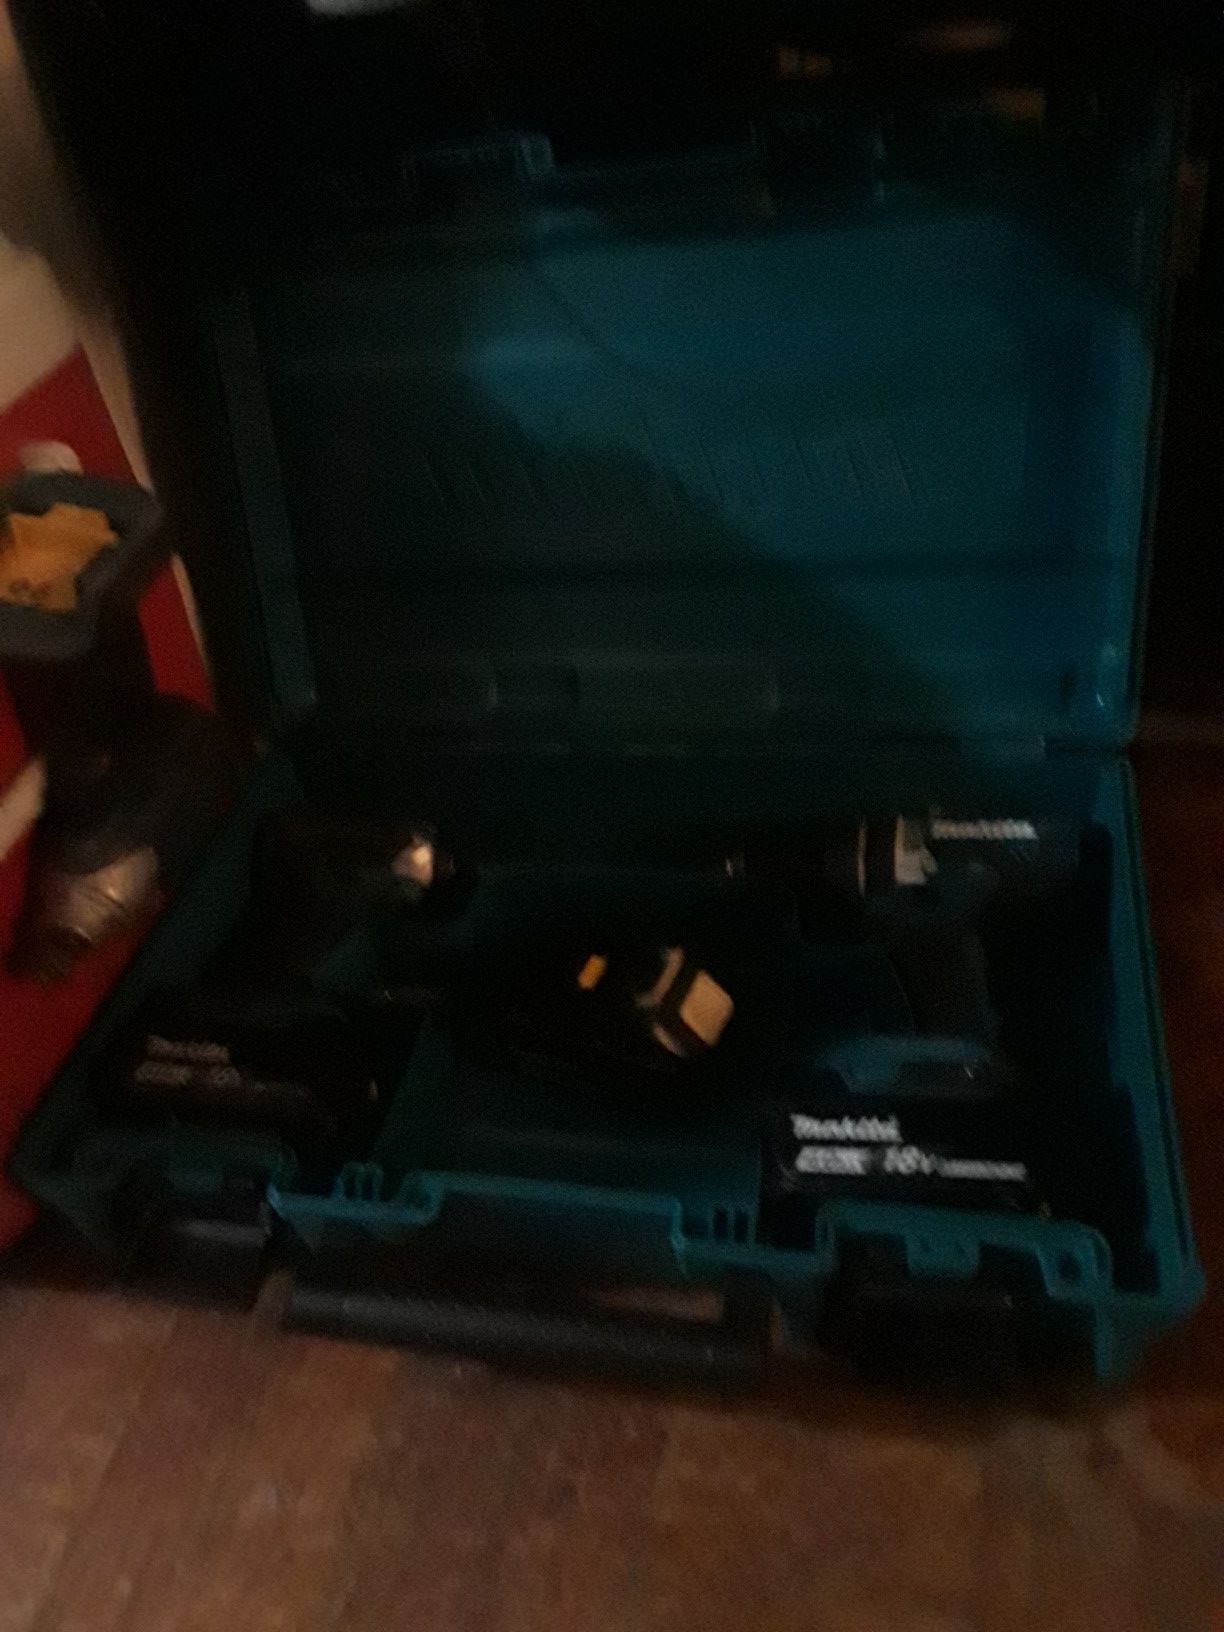 Makita 18 volt impact and drill with charger and 3 batteries $150 obo